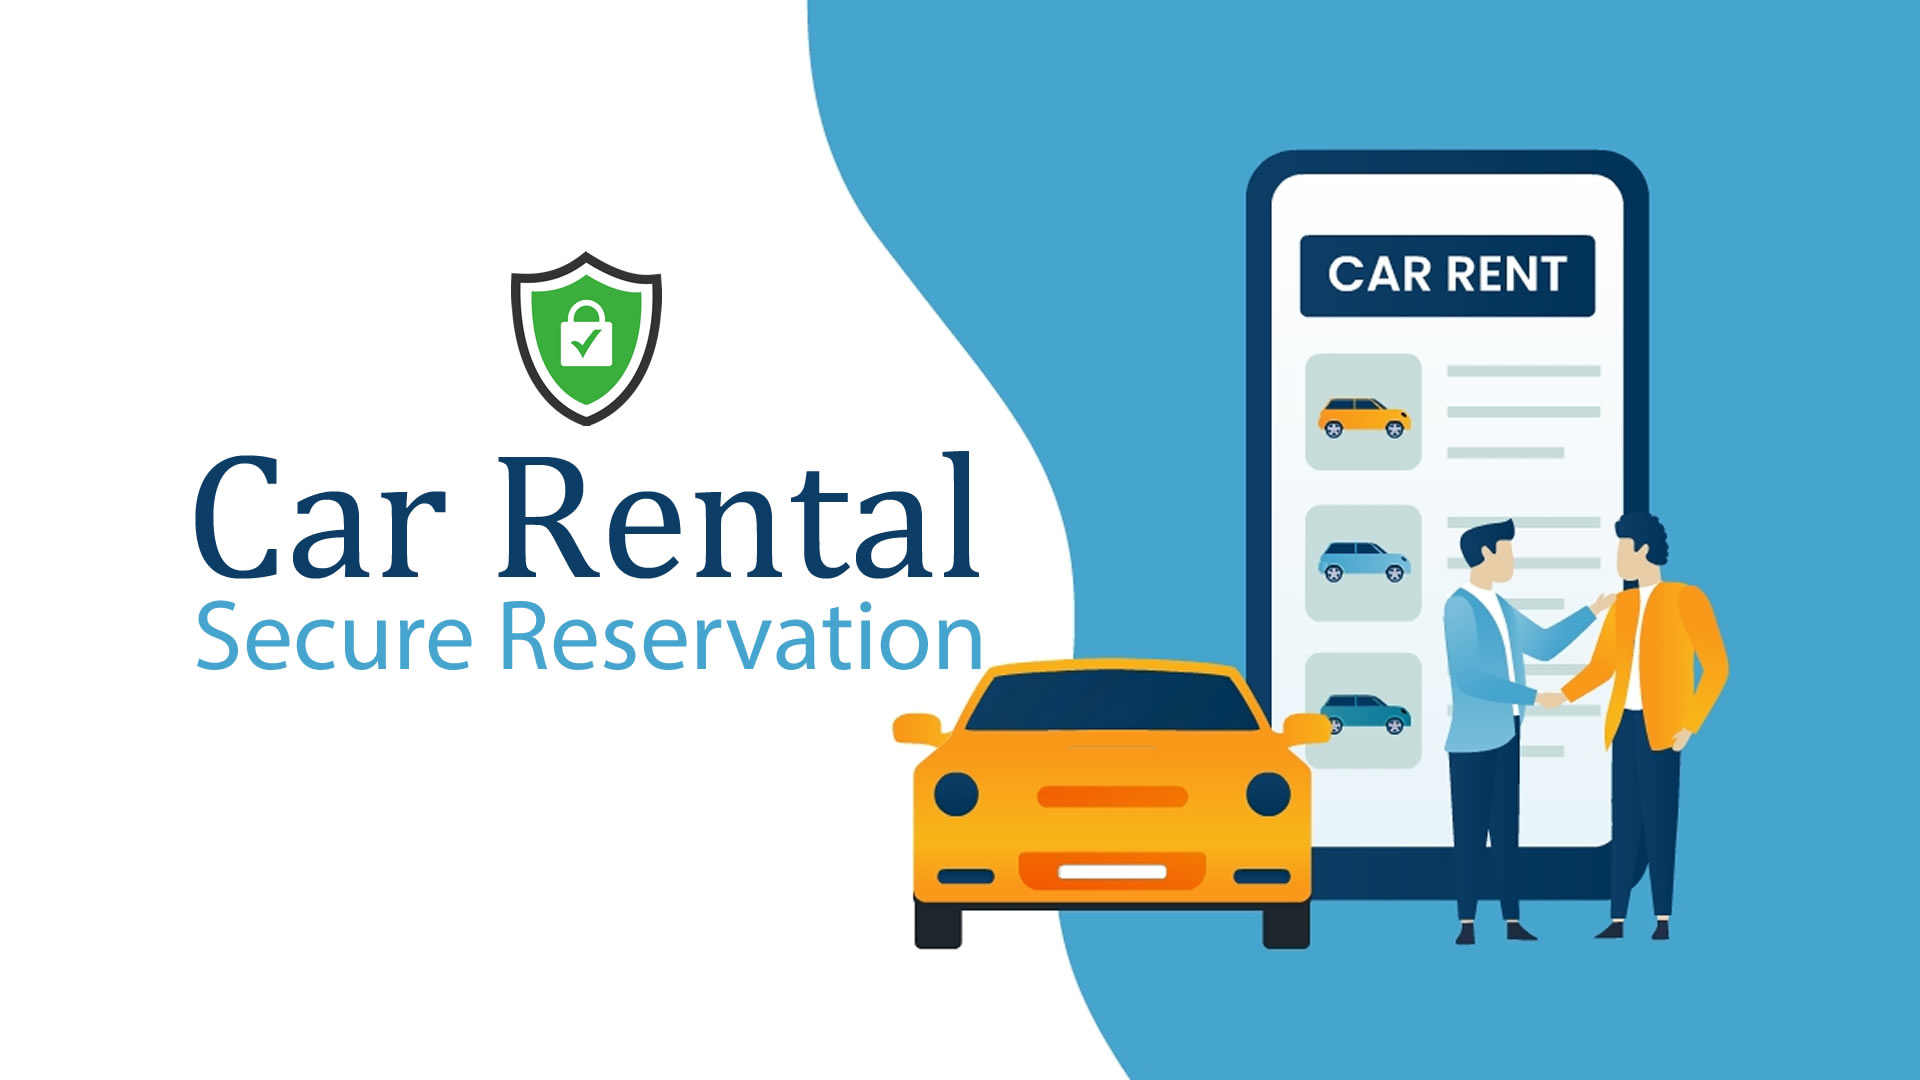 Points You Should Pay Attention to When Renting a Car